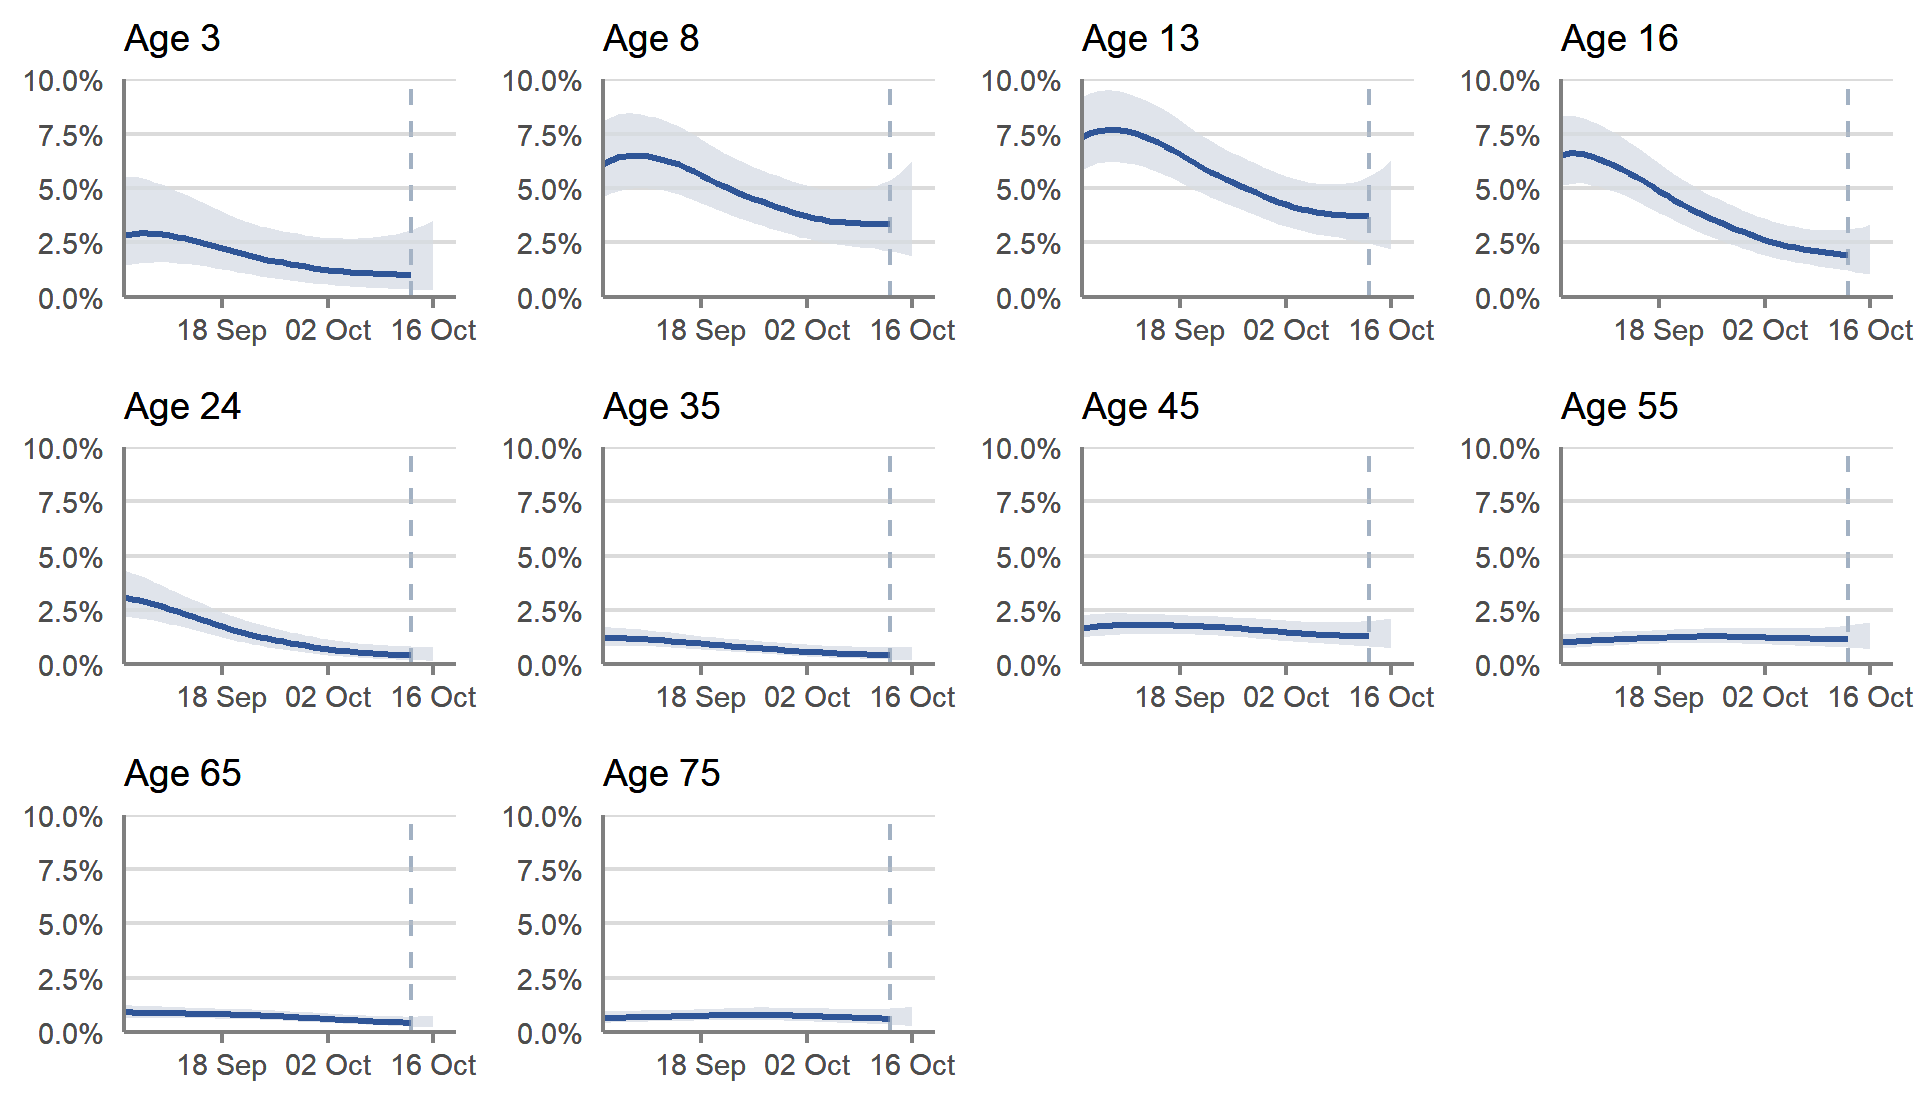 This chart shows the percentage of people testing positive for COVID-19 by reference age, between 4 September and 16 October 2021. These estimates are based on modelled daily estimates of the percentage of the private residential population testing positive for COVID-19 in Scotland by single year of age.  The proportion of people testing positive remains higher in the younger age groups. In recent weeks, the trend in the proportion of people living in private residential households testing positive in Scotland has decreased in those of school age and young adults. For older age groups, rates have decreased for those below 60, however the trend is uncertain for those aged 60 and above in recent weeks.